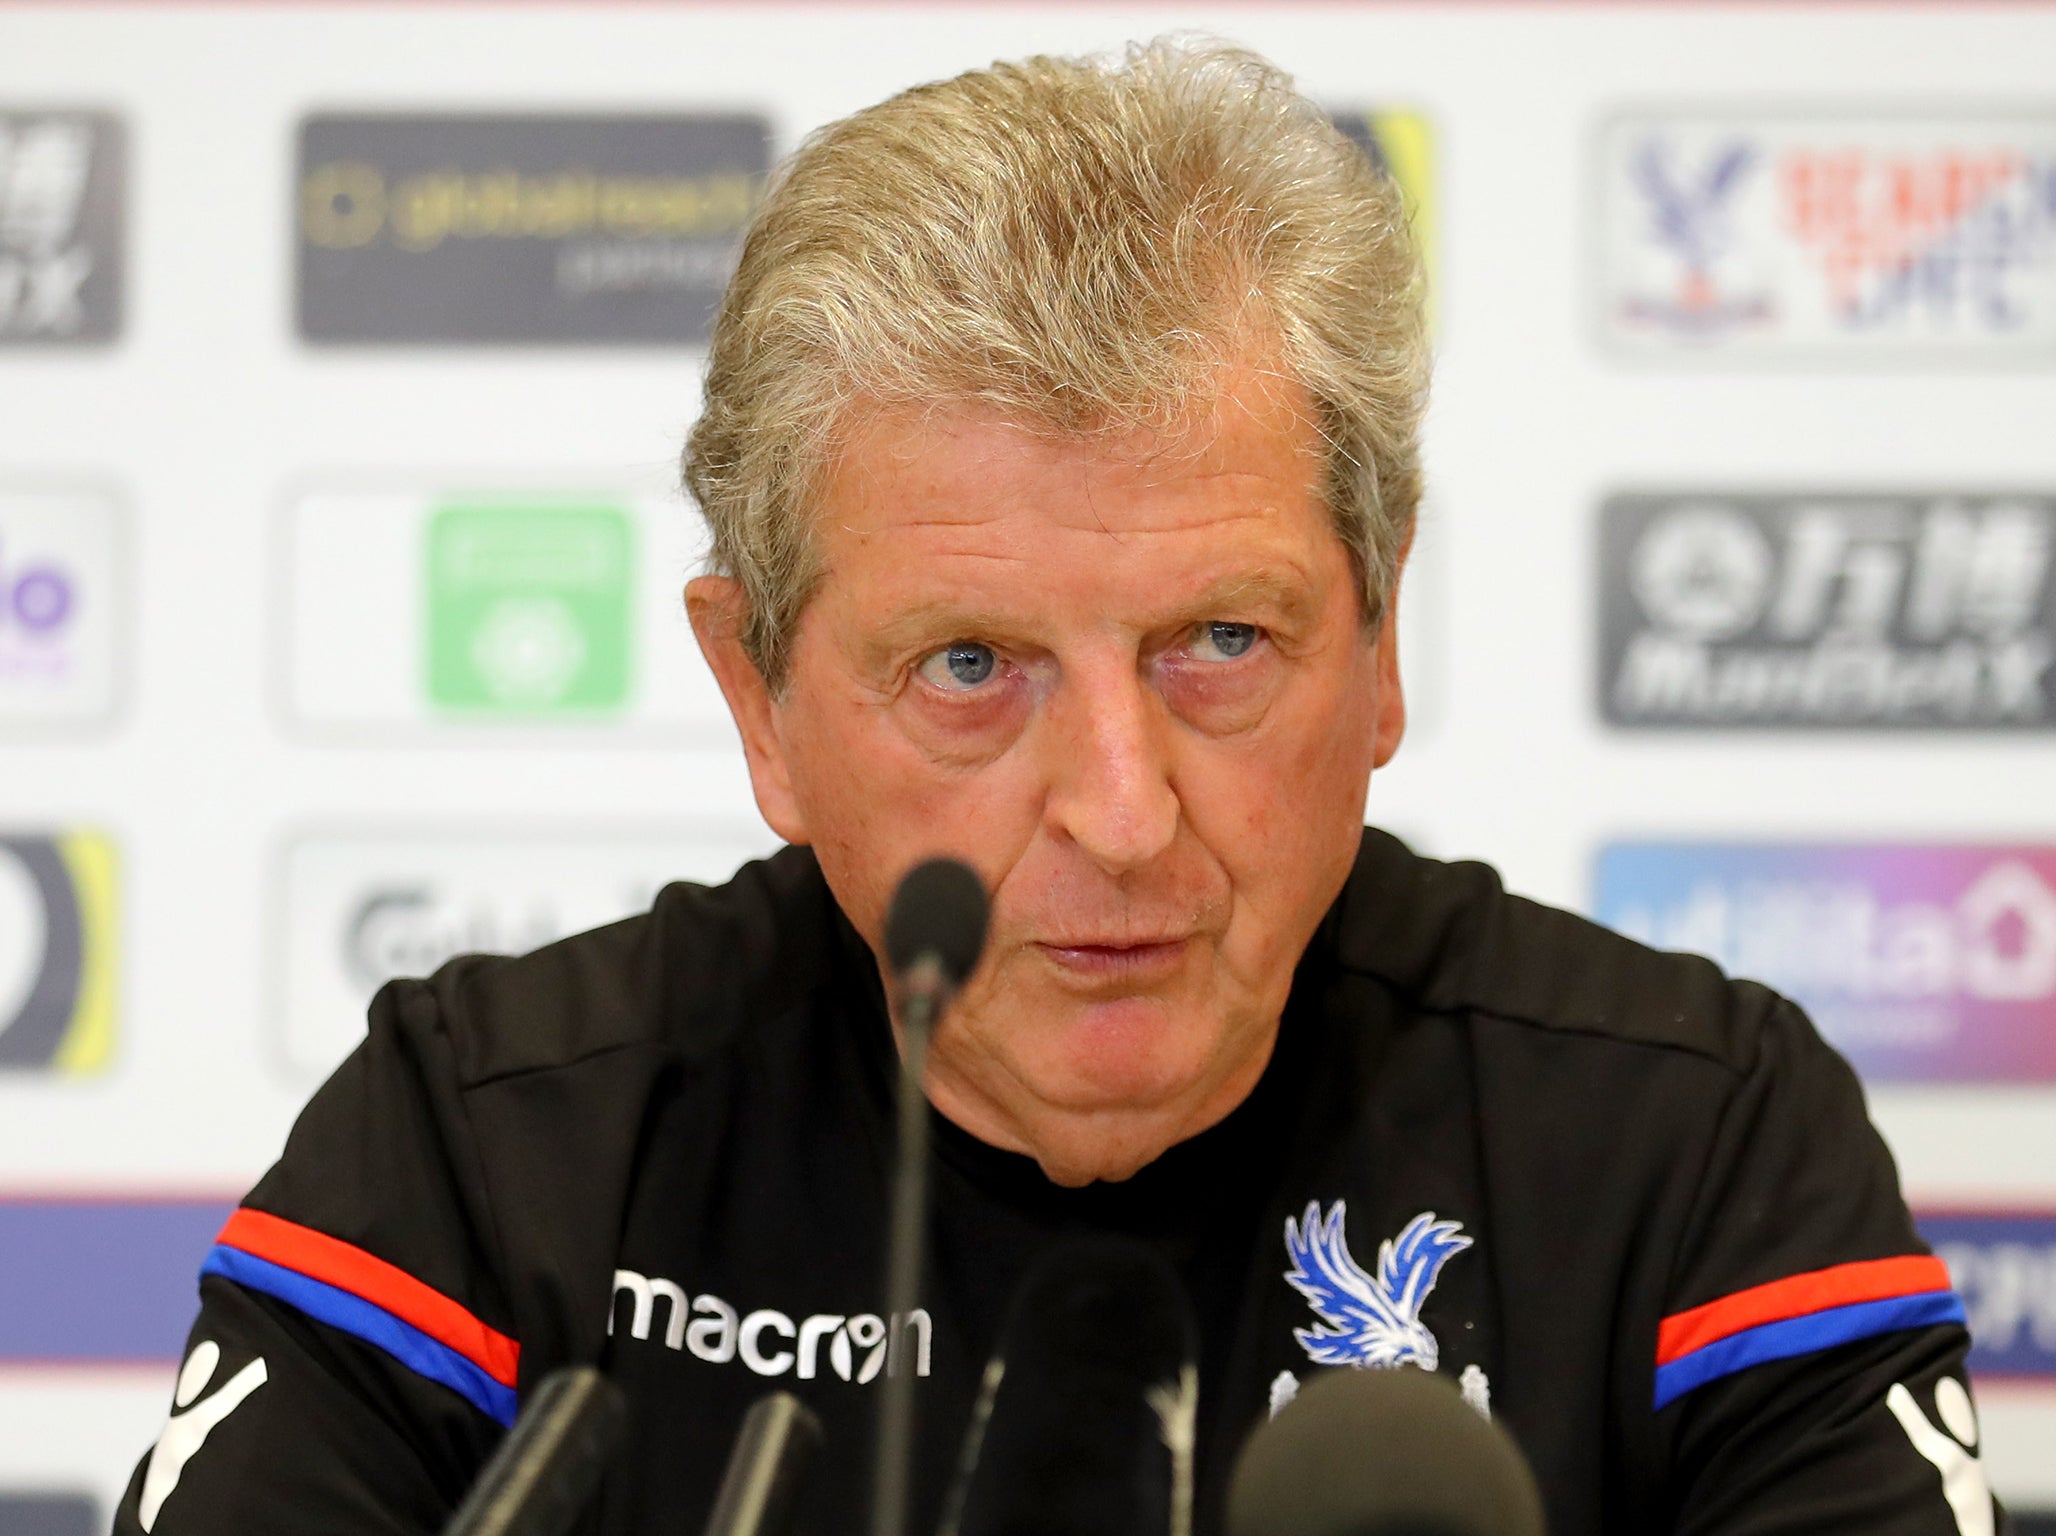 Hodgson hinted that he will be going back to basics